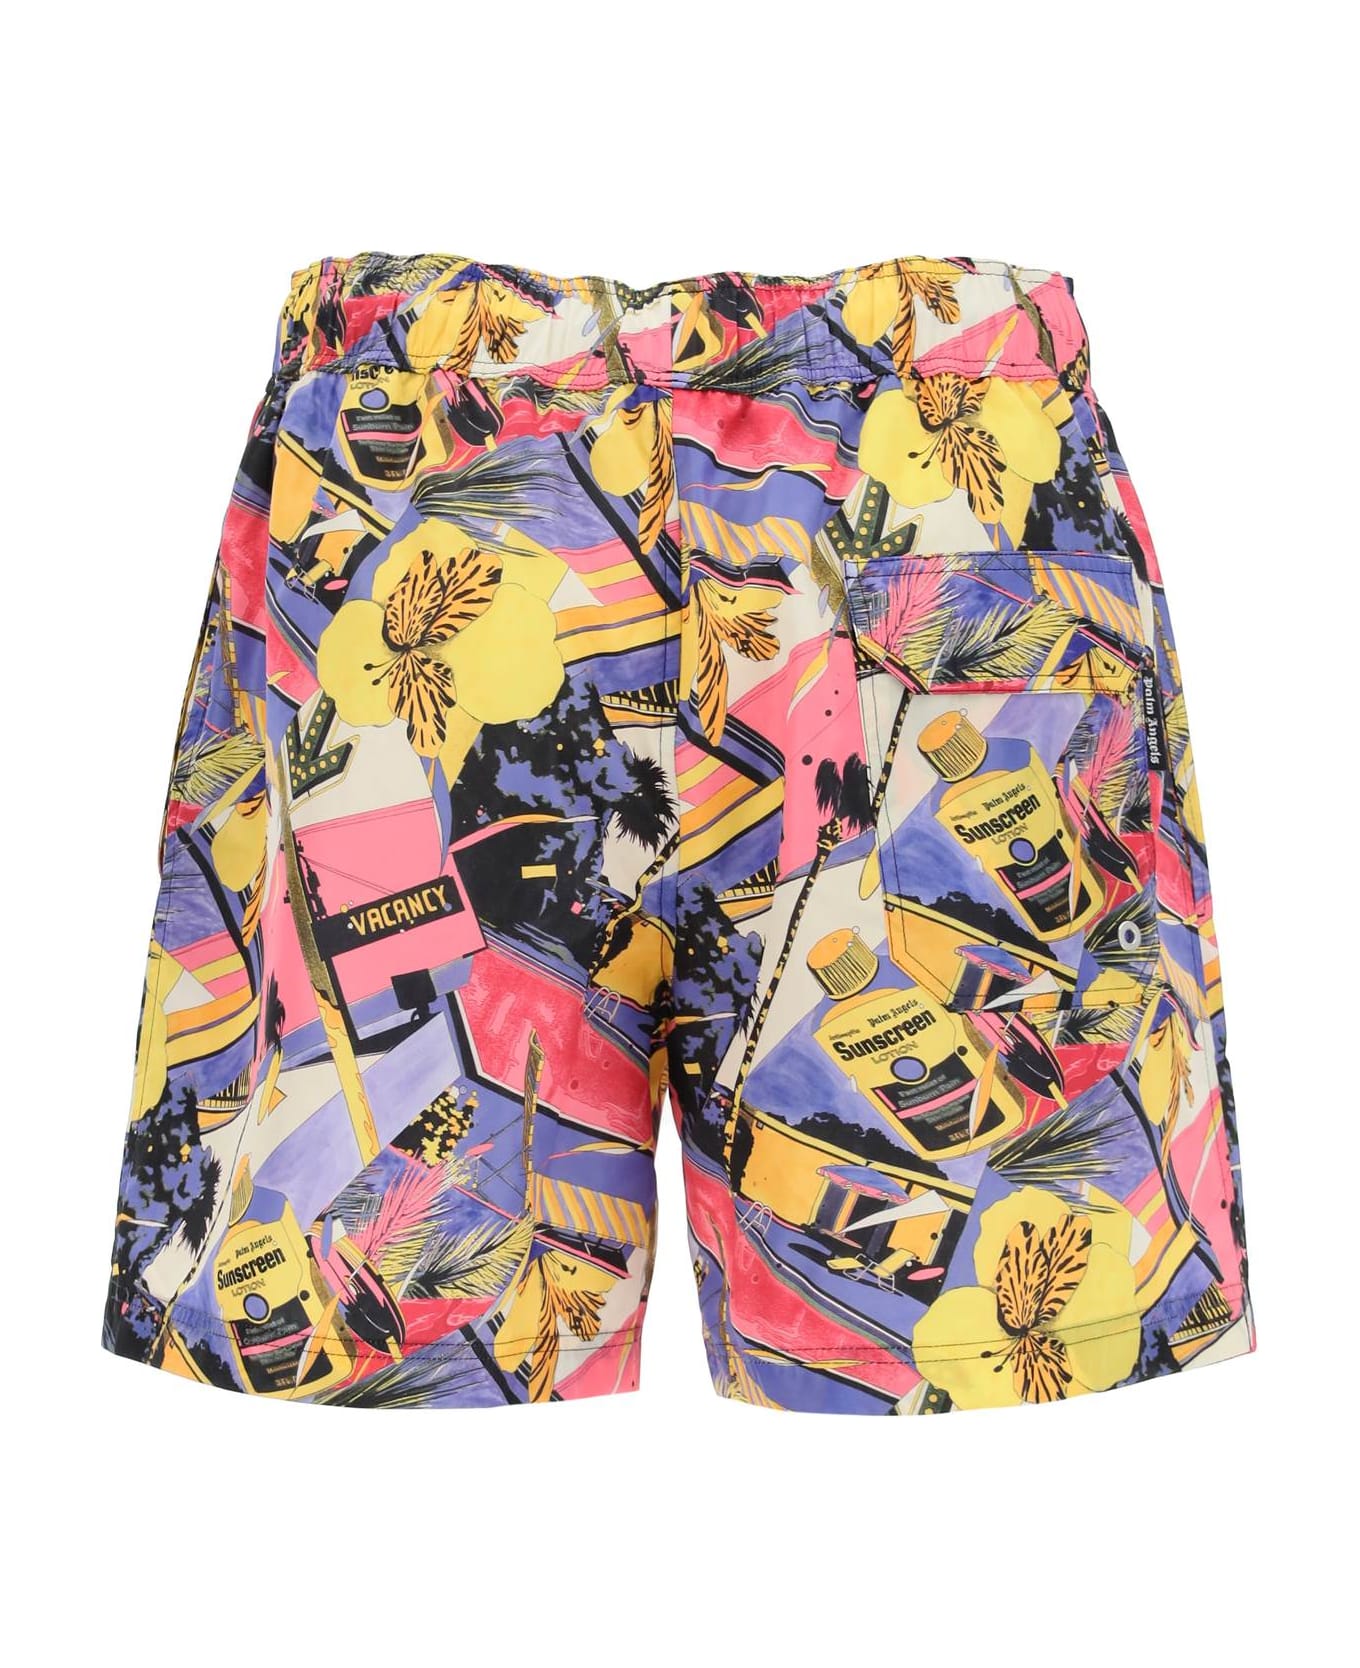 Palm Angels Swimtrunks With Miami Mix Print - Multicolor